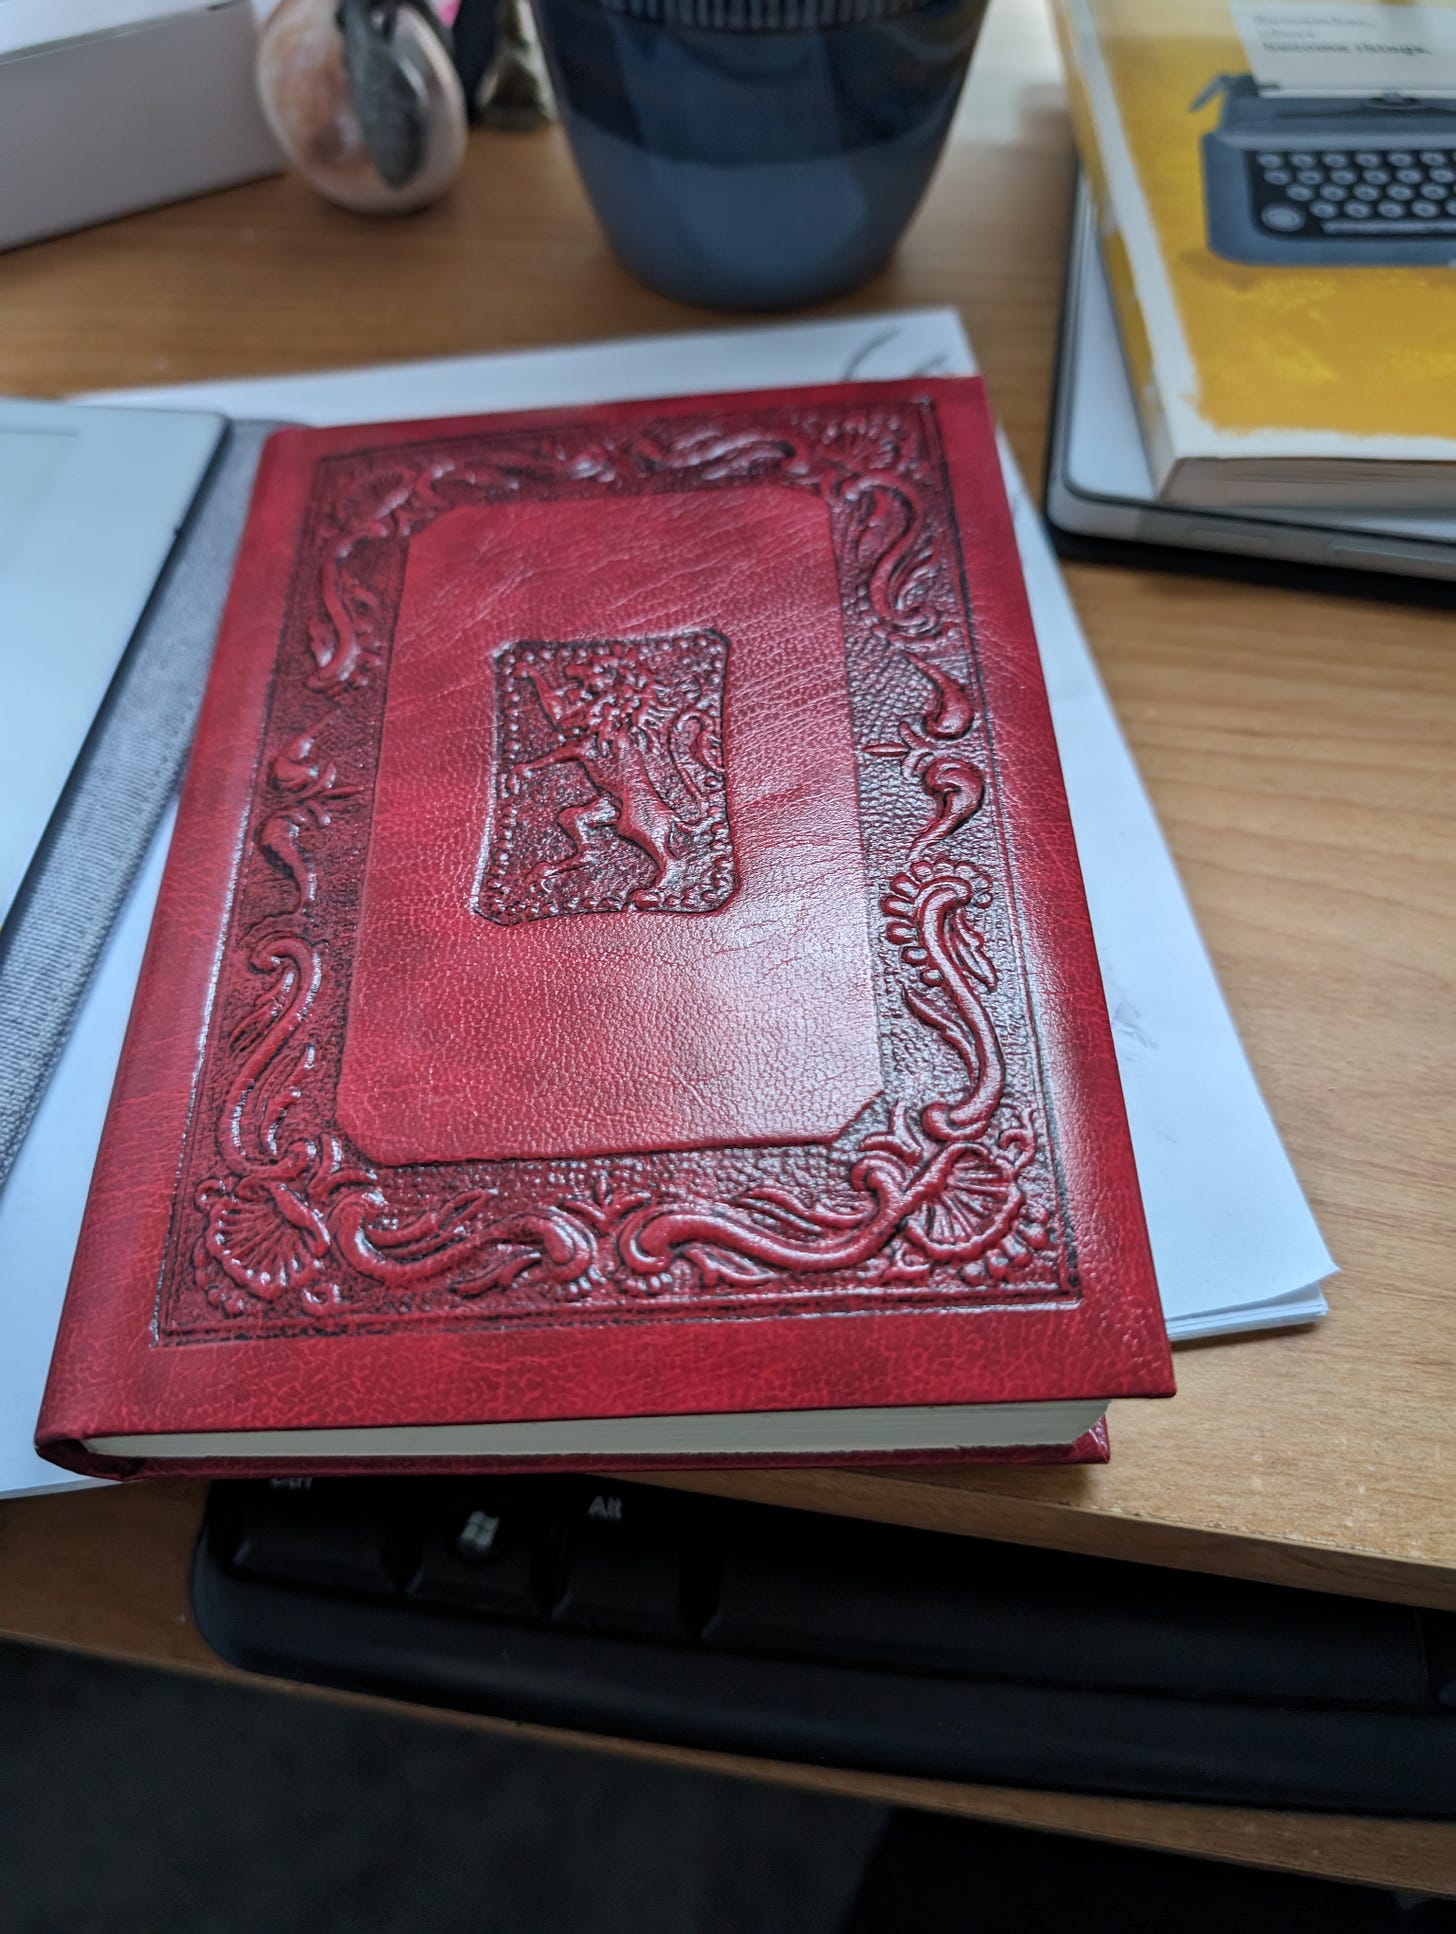 Red leather journal